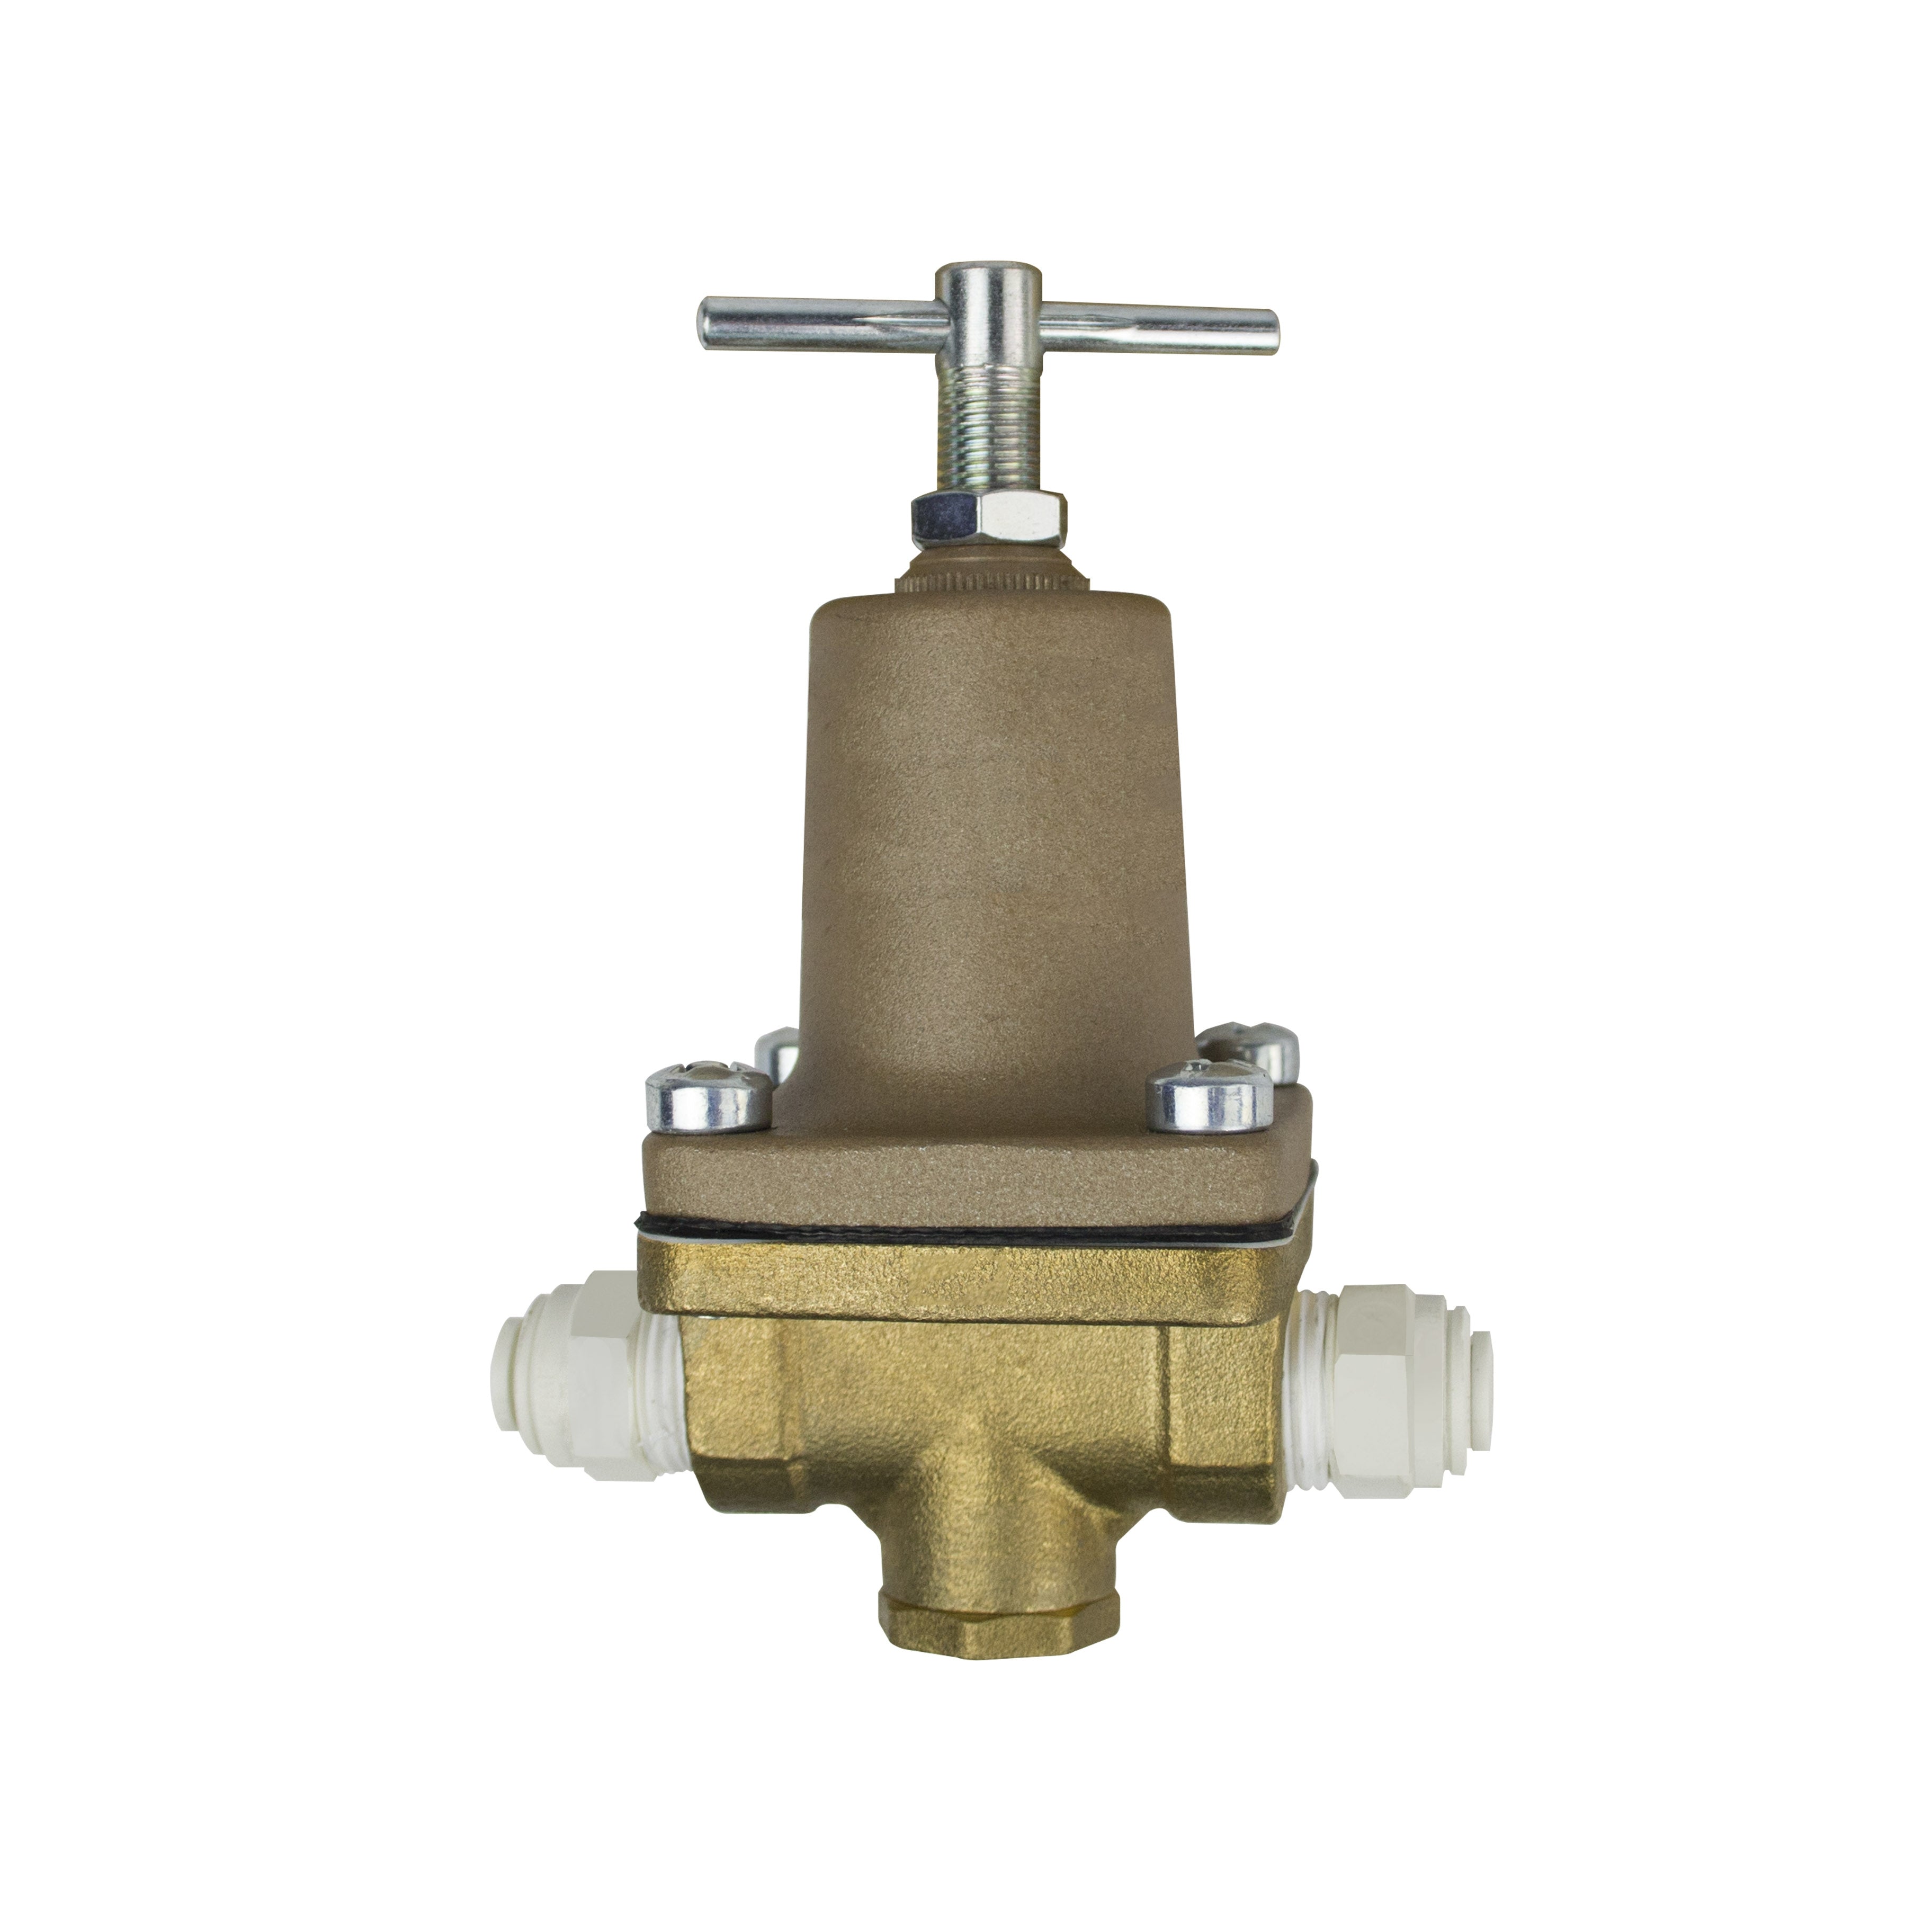 Water Pressure Regulator 10-125 PSI, 1/4" In/Out, with John Guest fittings